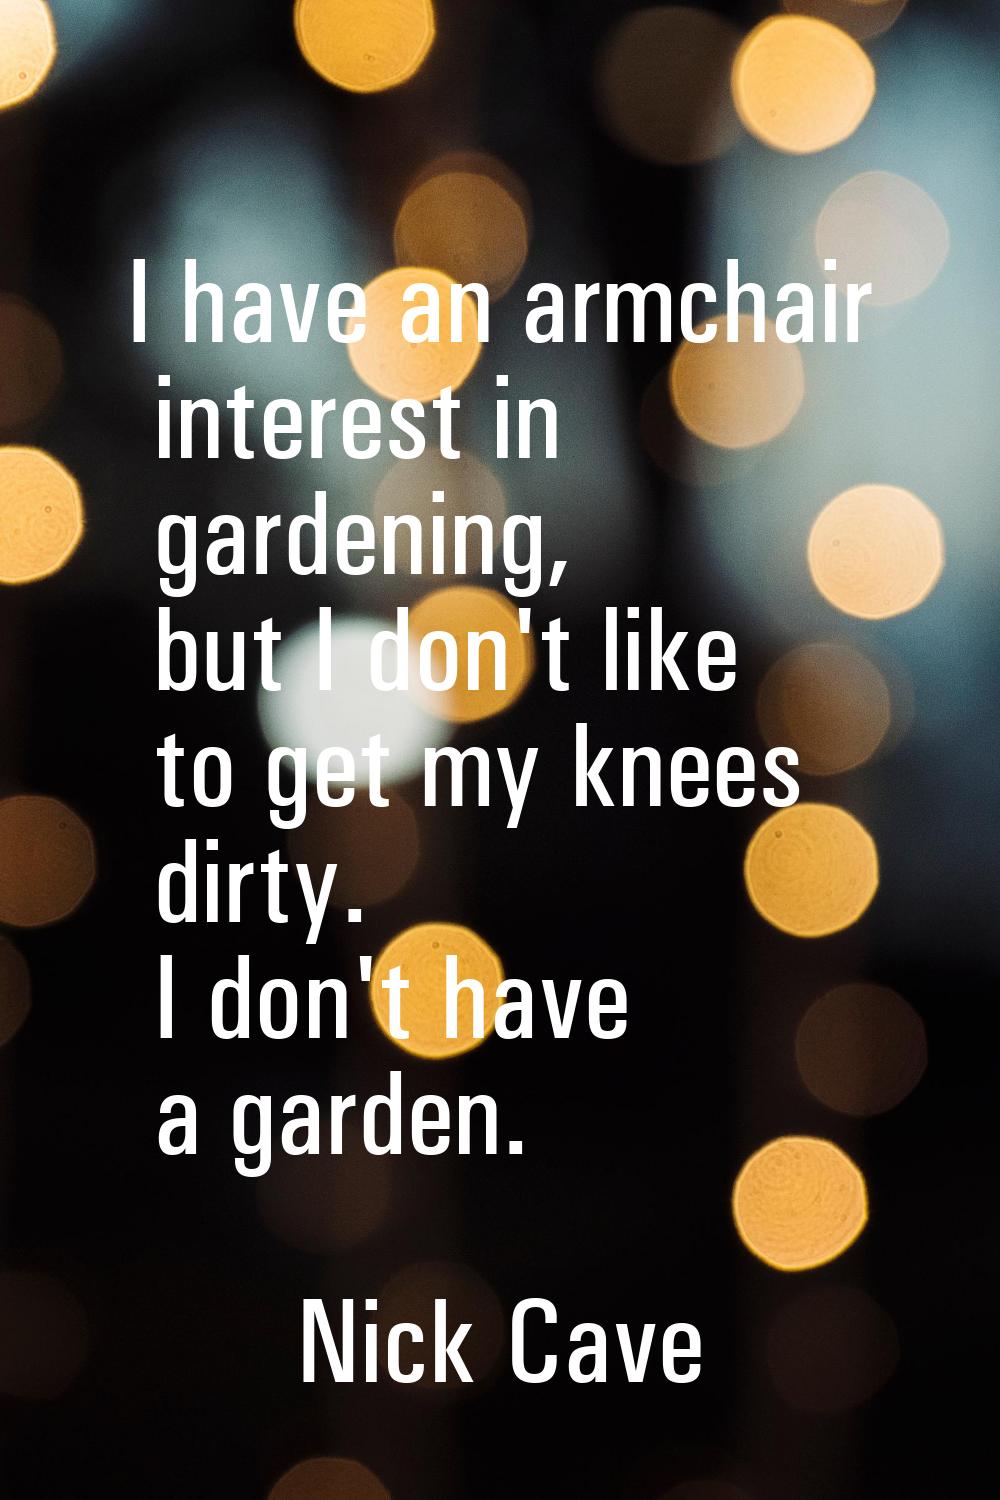 I have an armchair interest in gardening, but I don't like to get my knees dirty. I don't have a ga